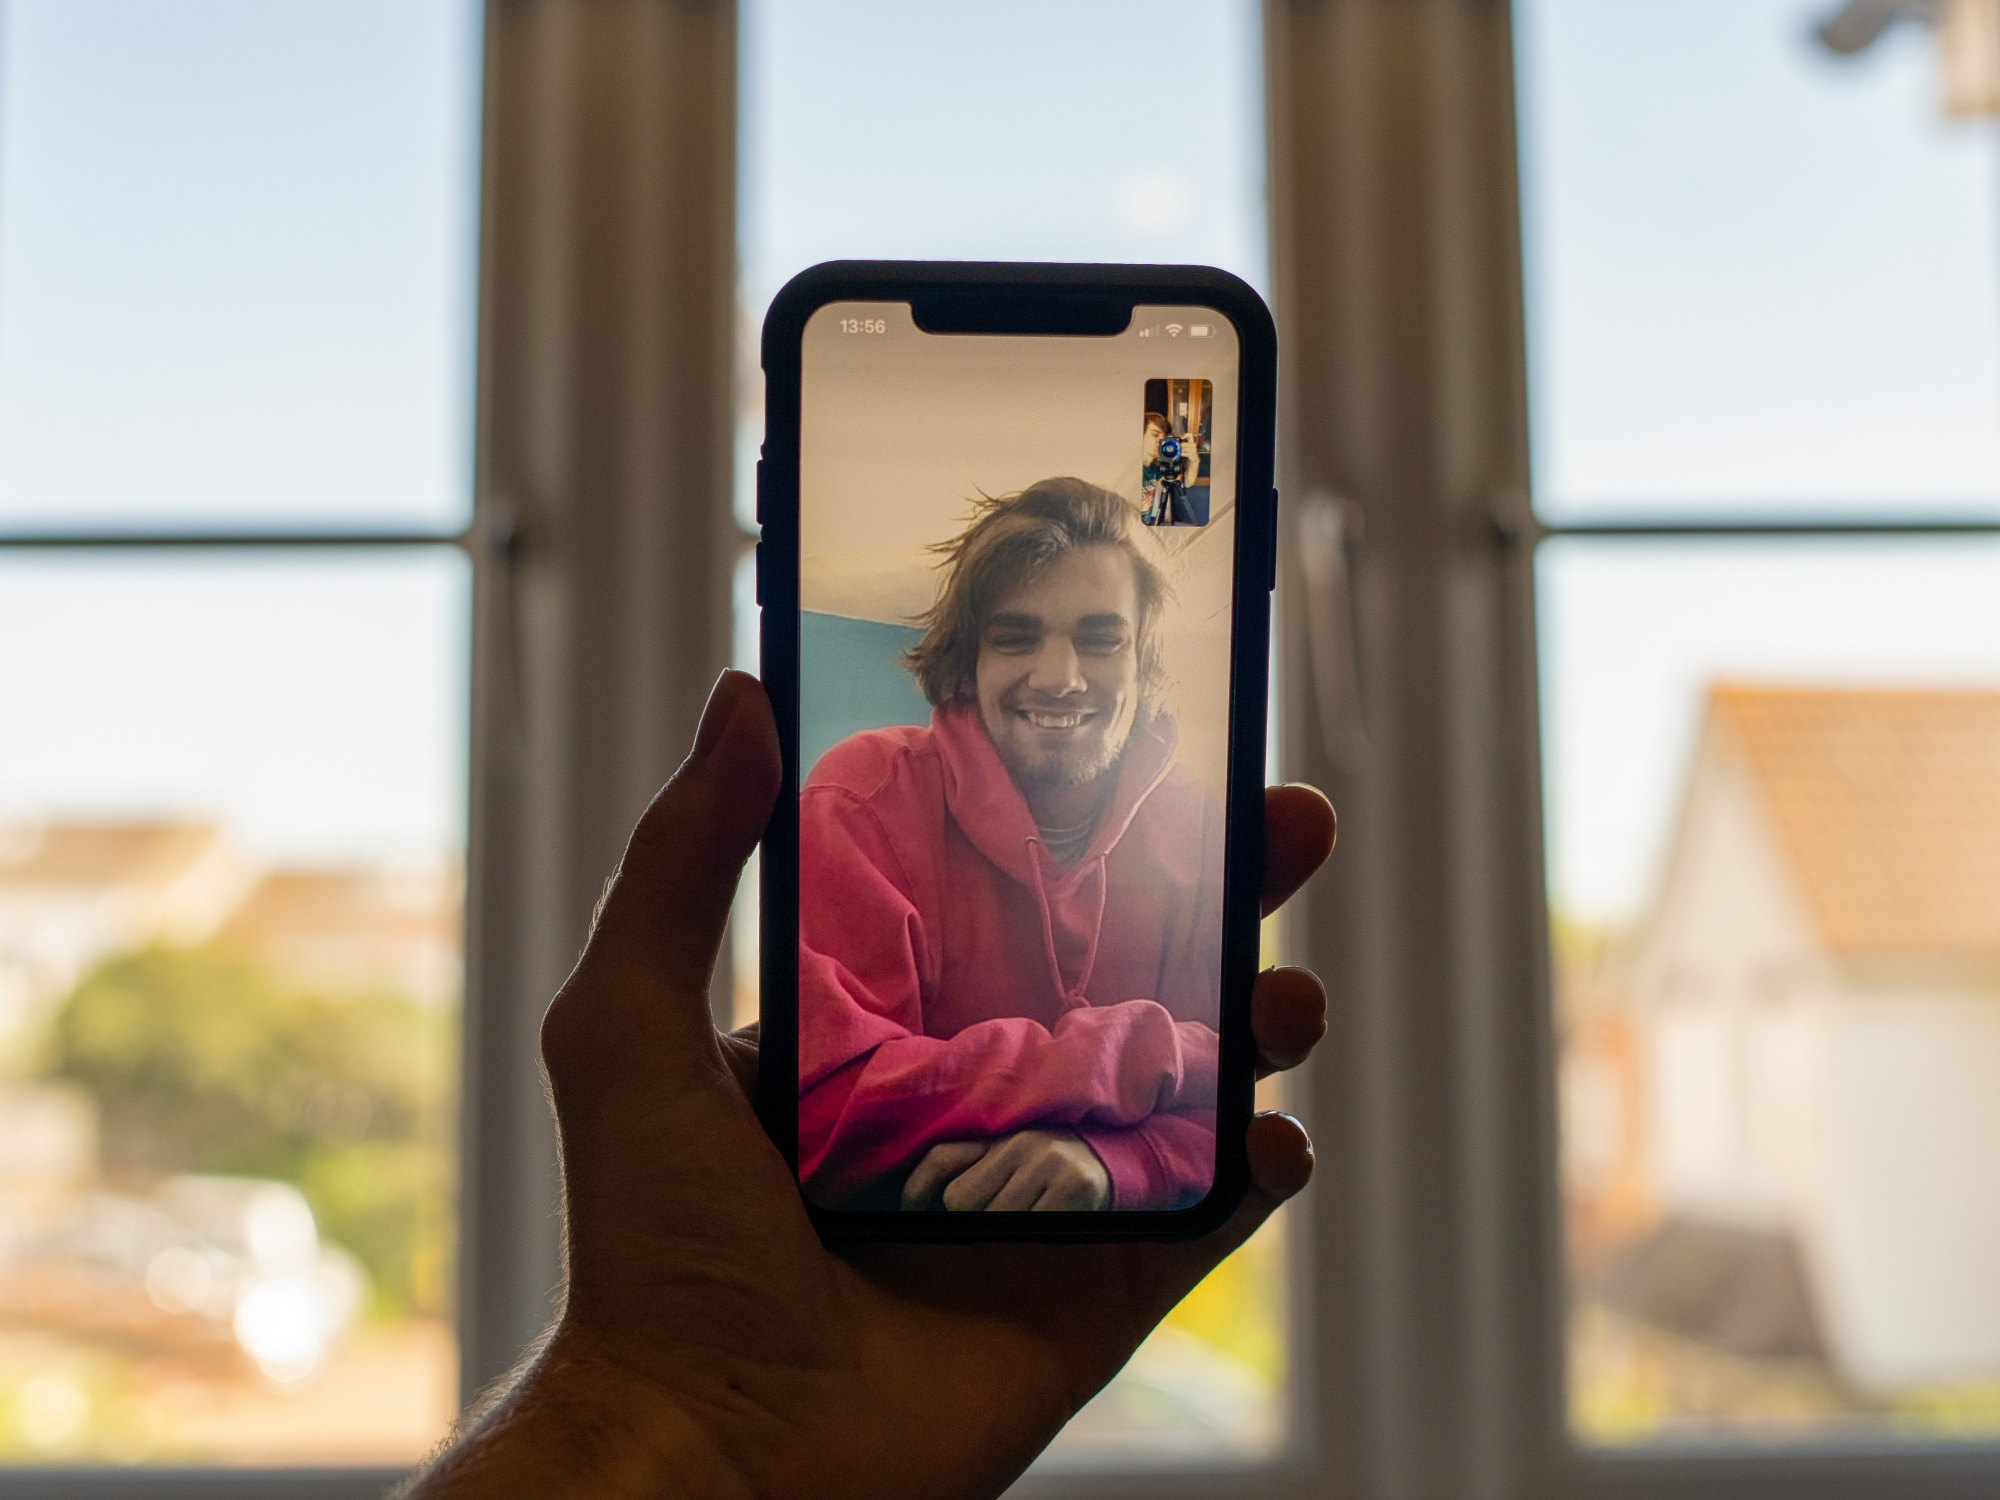 A person holding an iPhone in front of a window while having a FaceTime call with someone in a red sweatshirt.